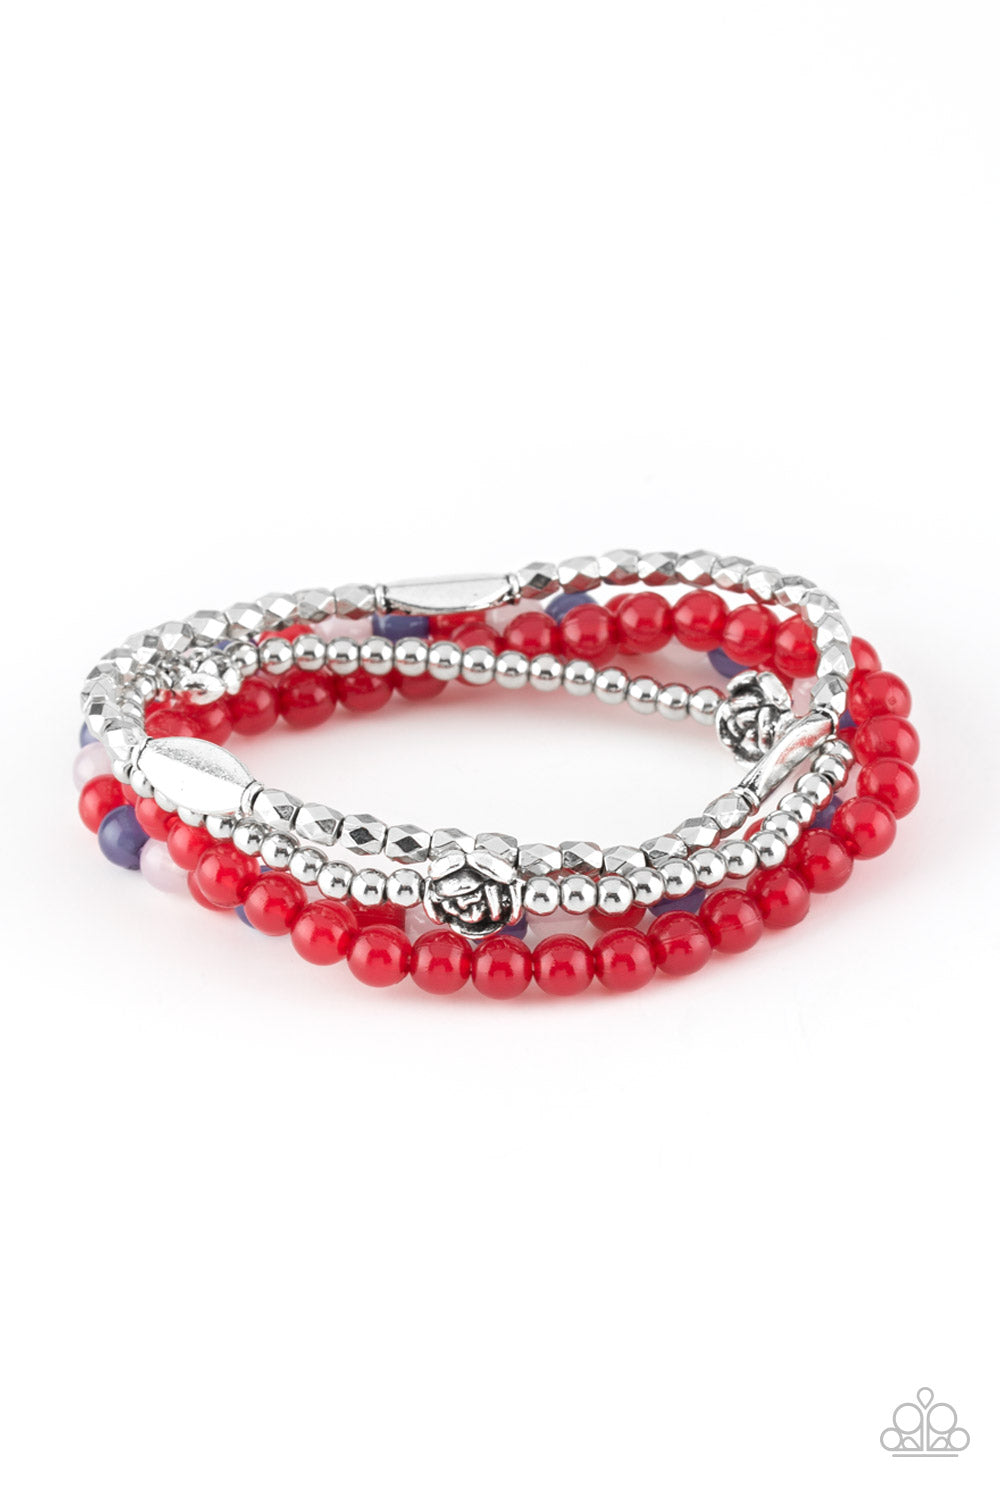 BLOOMING BUTTERCUPS - MULTI RED WHITE BLUE STRETCH BRACELET SET